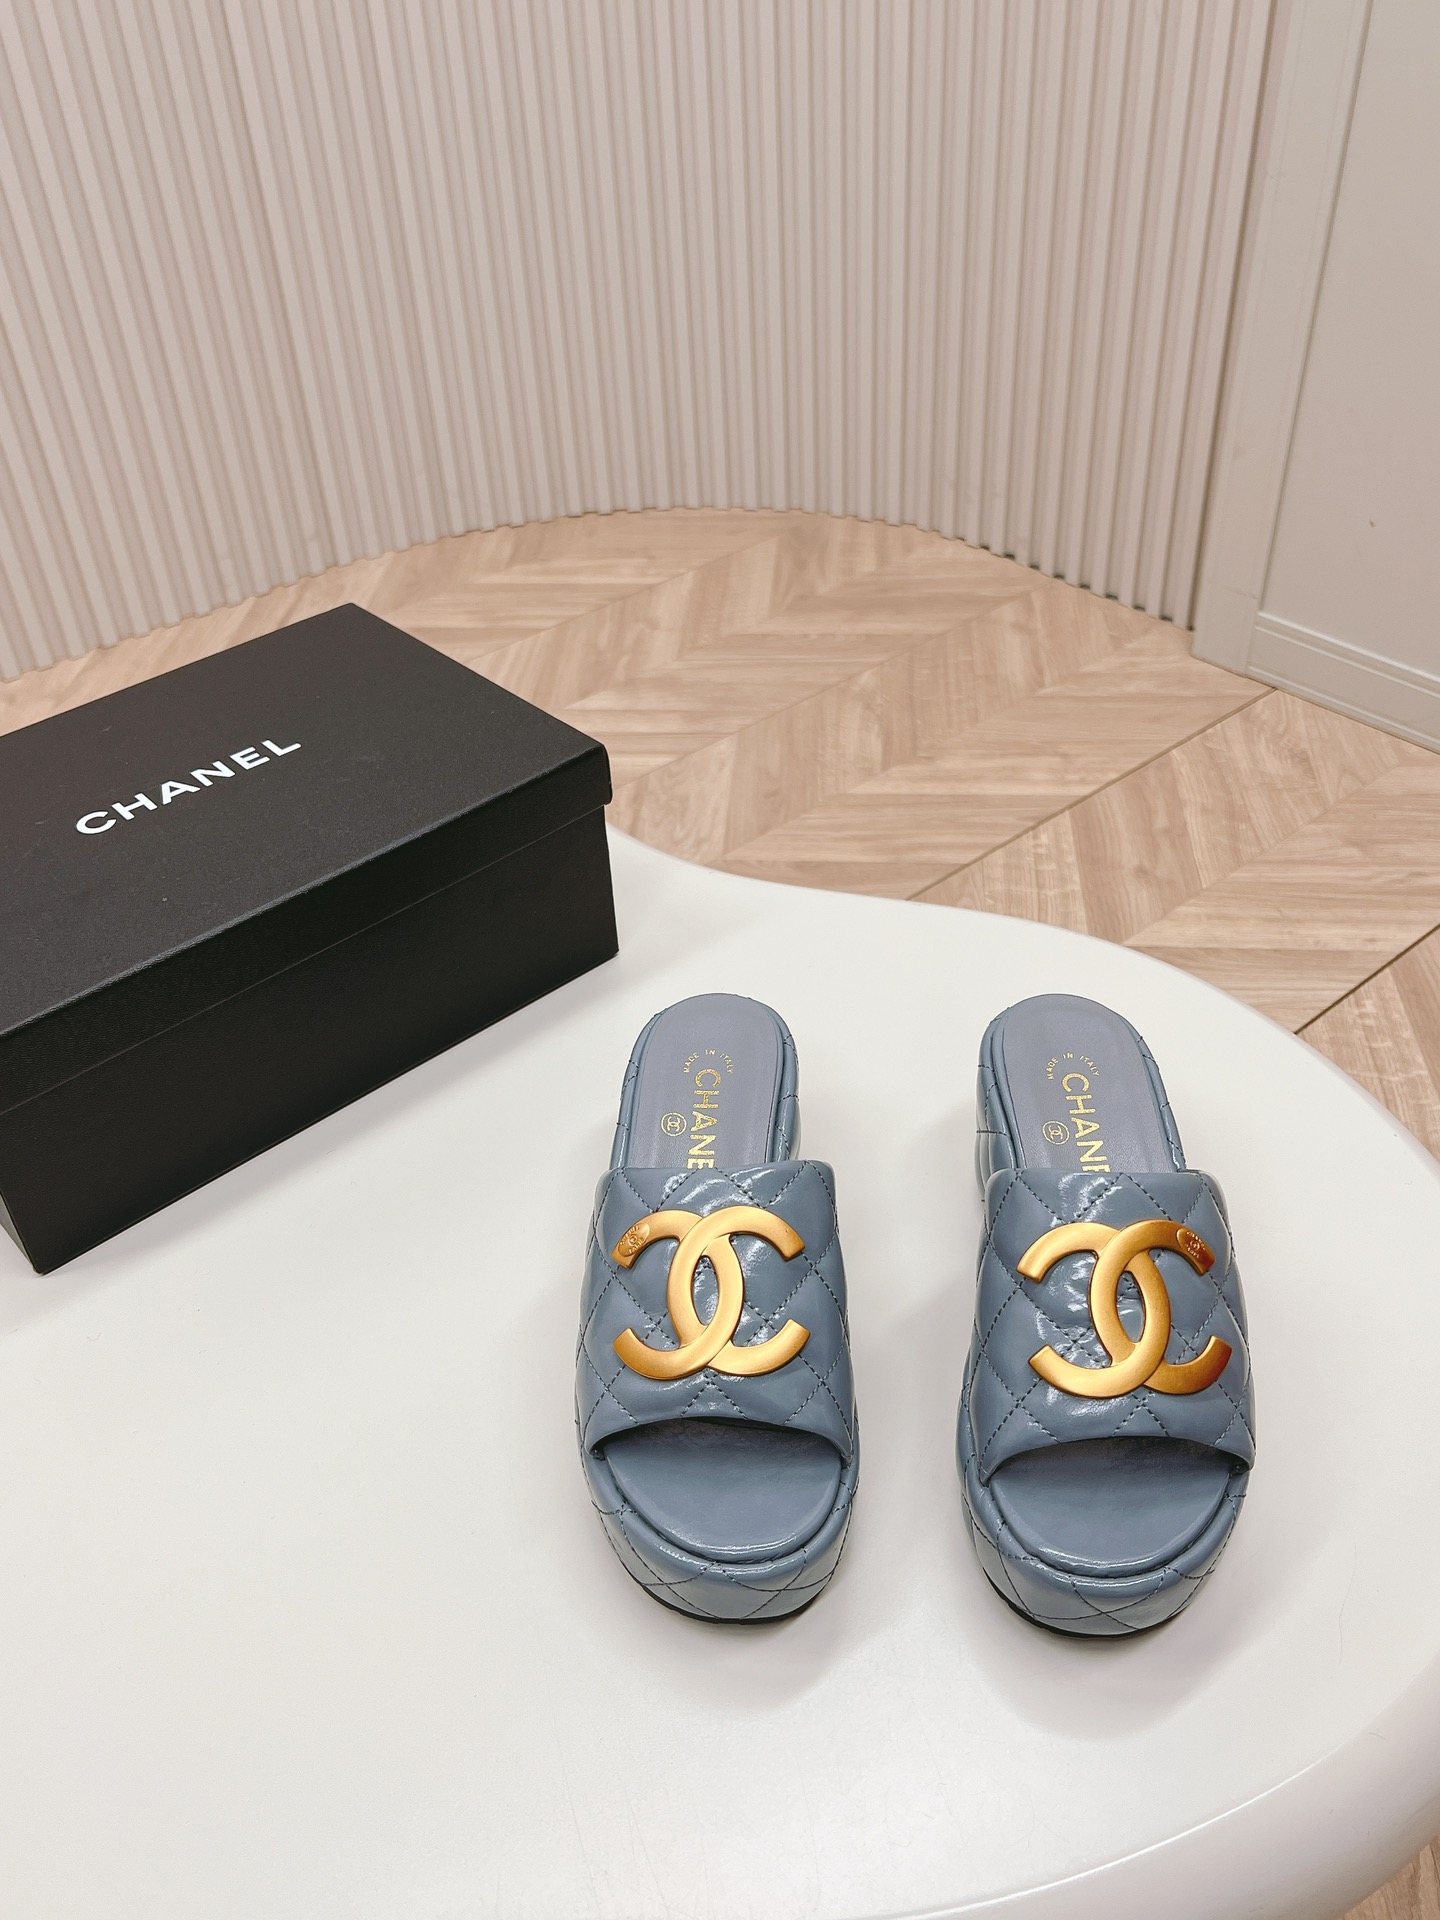 Chanel Shoes Sandals Slippers Rubber Sheepskin